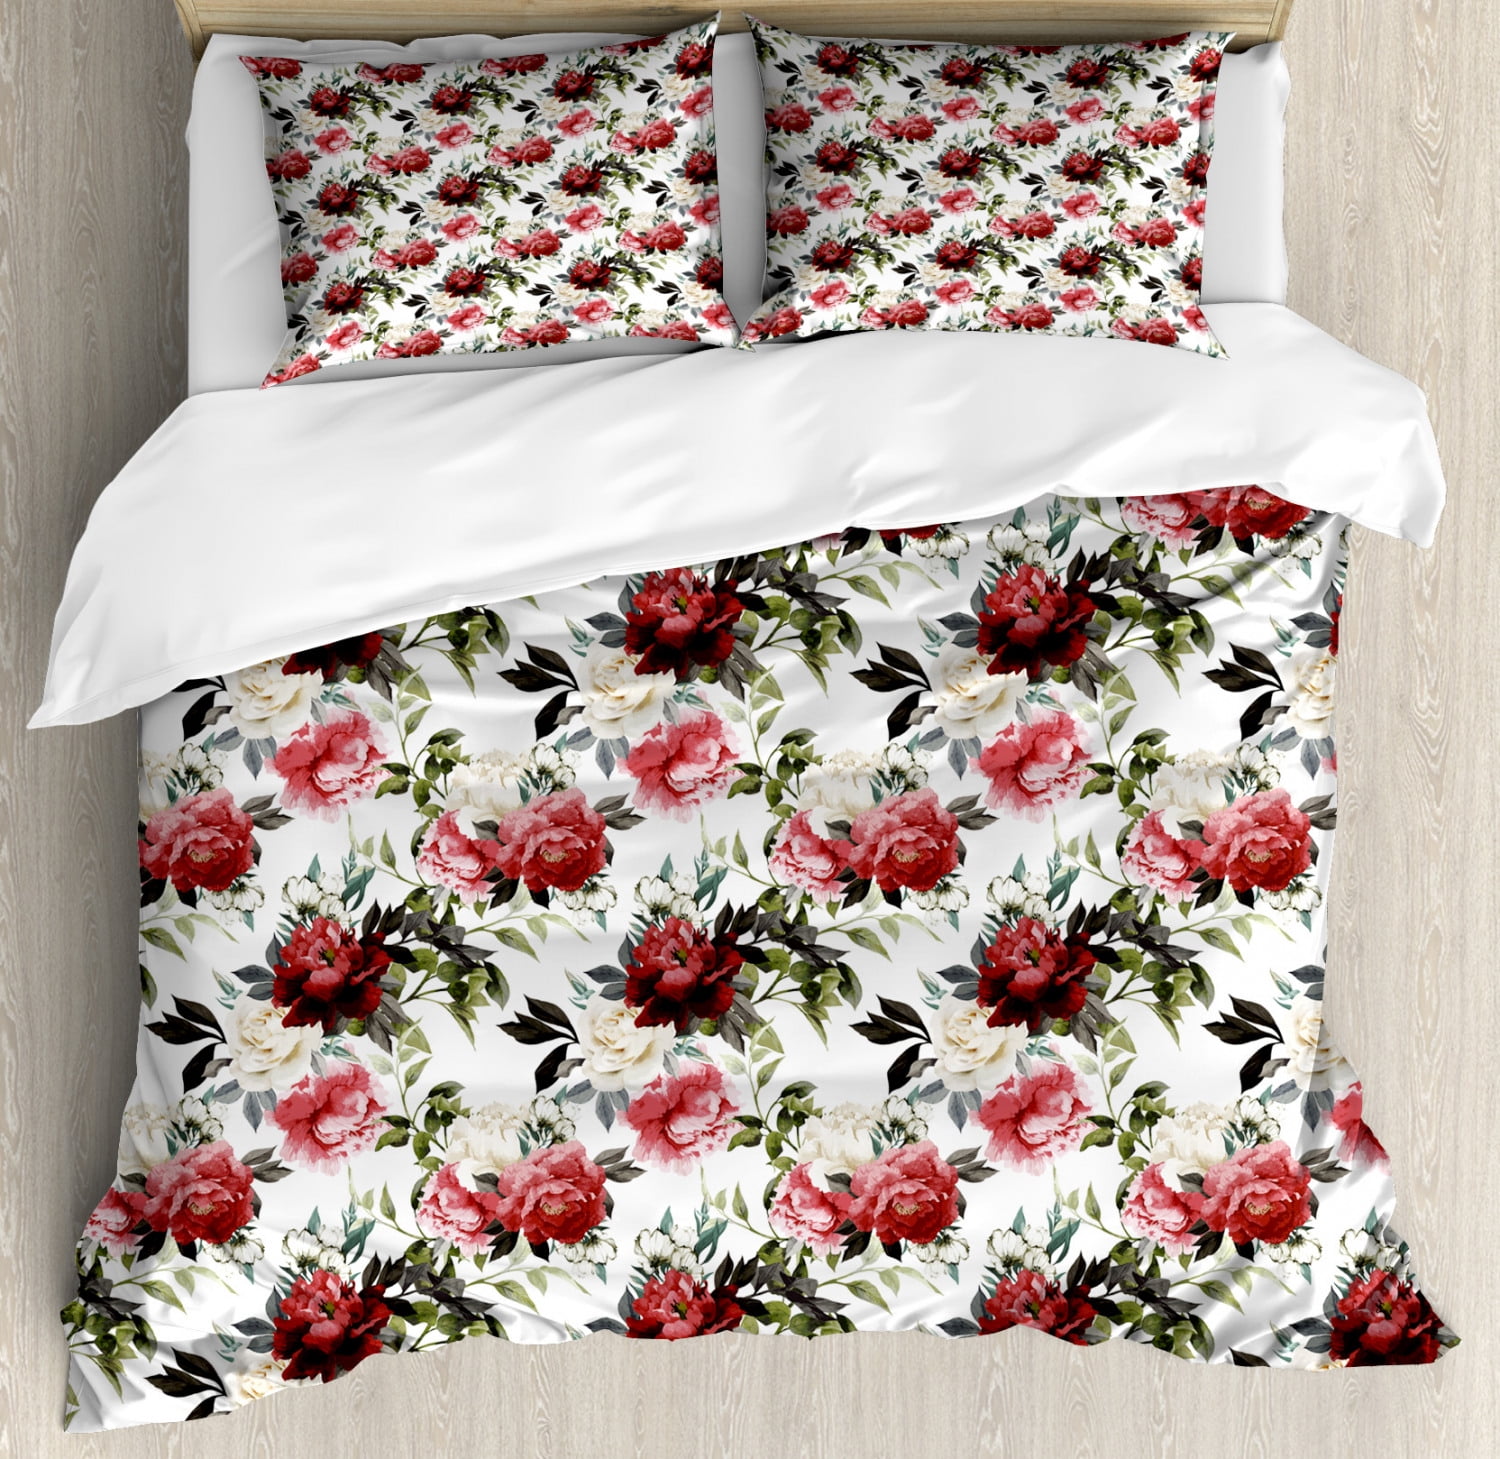 Shabby Chic Duvet Cover Set Country Style Floral Flower Roses Watercolor Image Art Decorative Bedding Set With Pillow Shams Cream Dark Coral Maroon And Green By Ambesonne Walmart Com Walmart Com